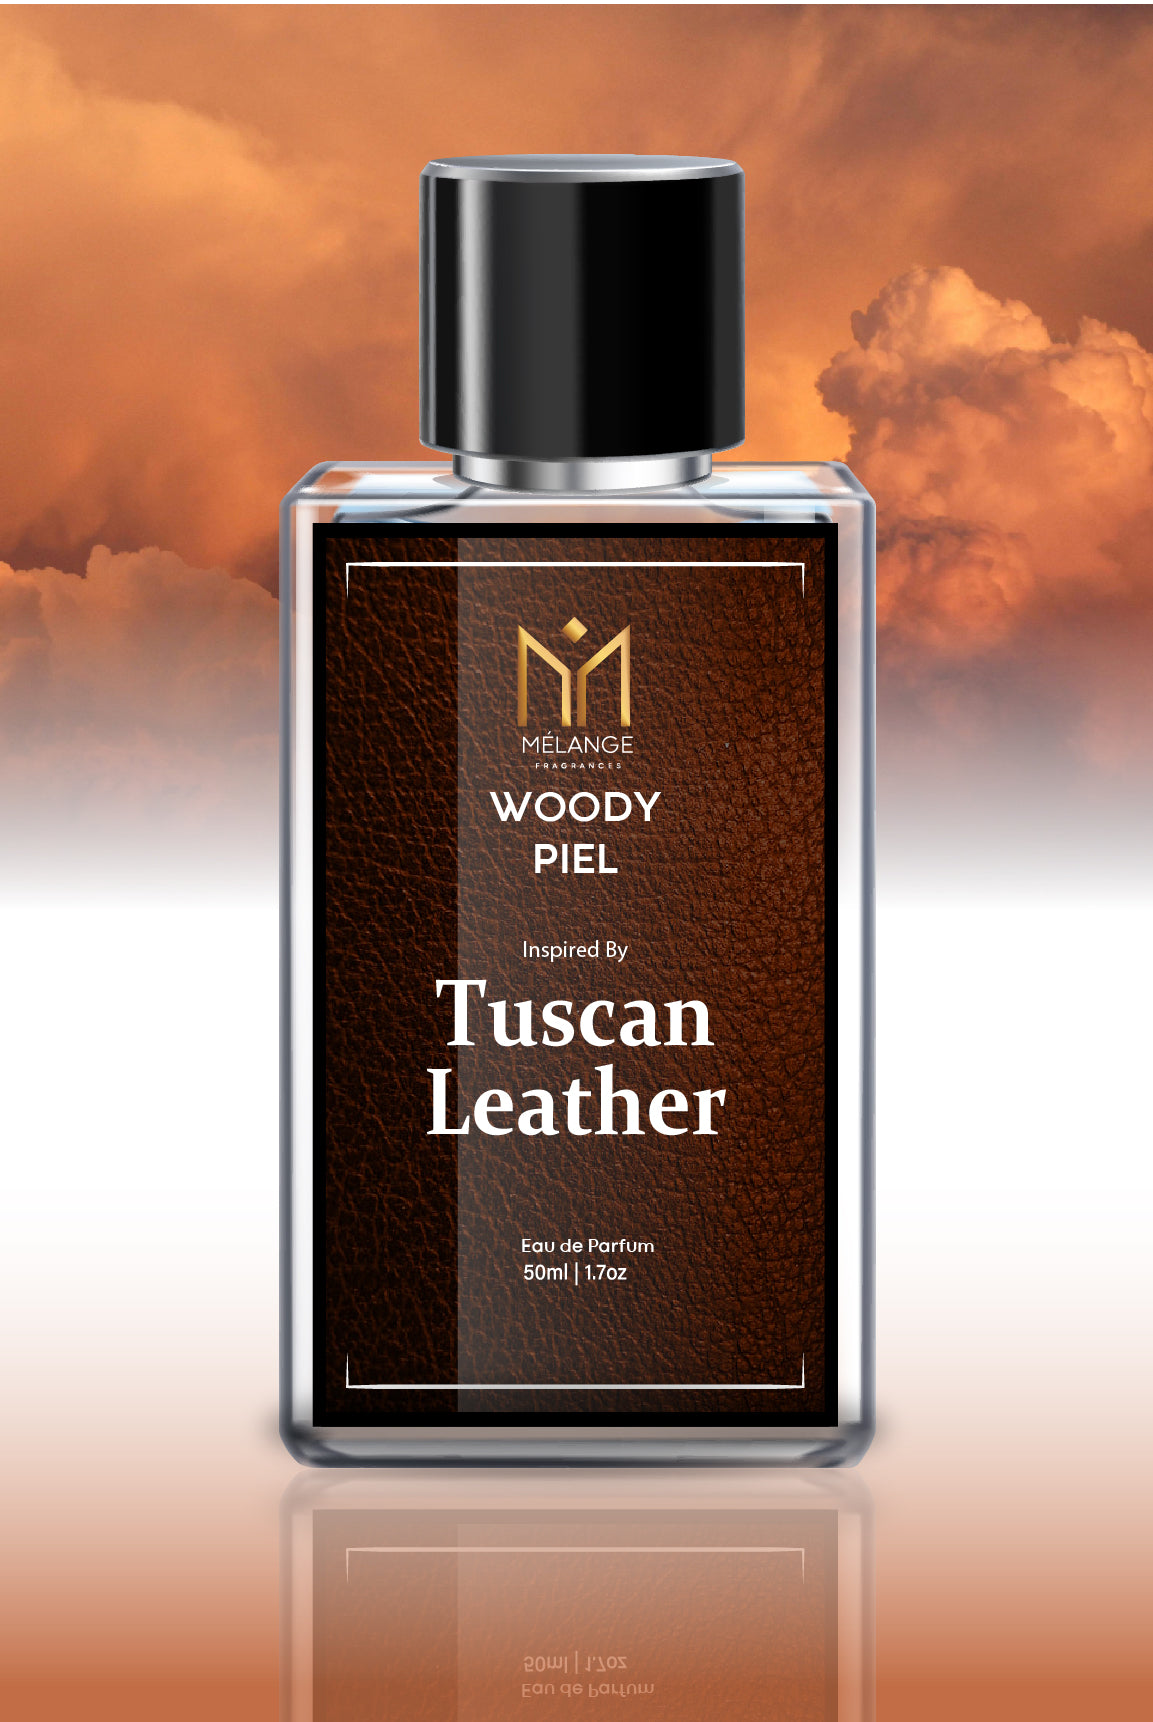 WOODY PIEL- Inspired by Tuscan Leather